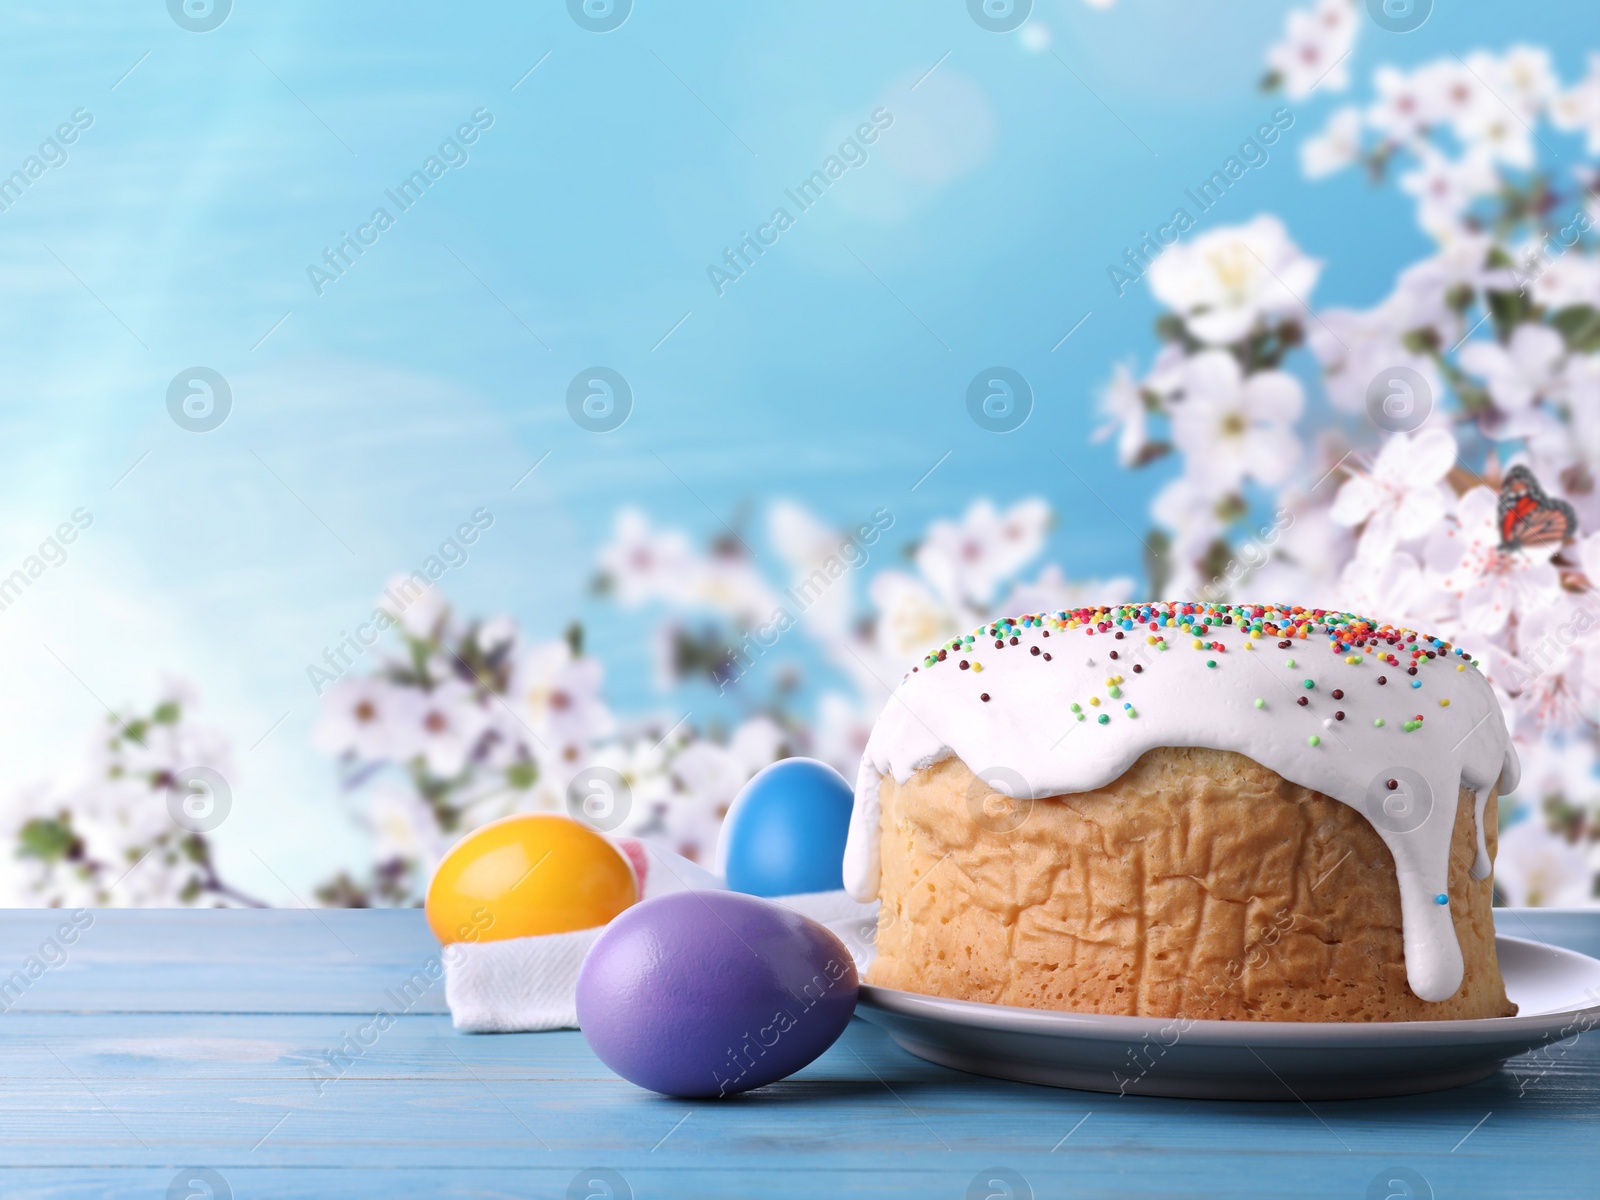 Image of Easter cake and dyed eggs on blue wooden table outdoors, space for text